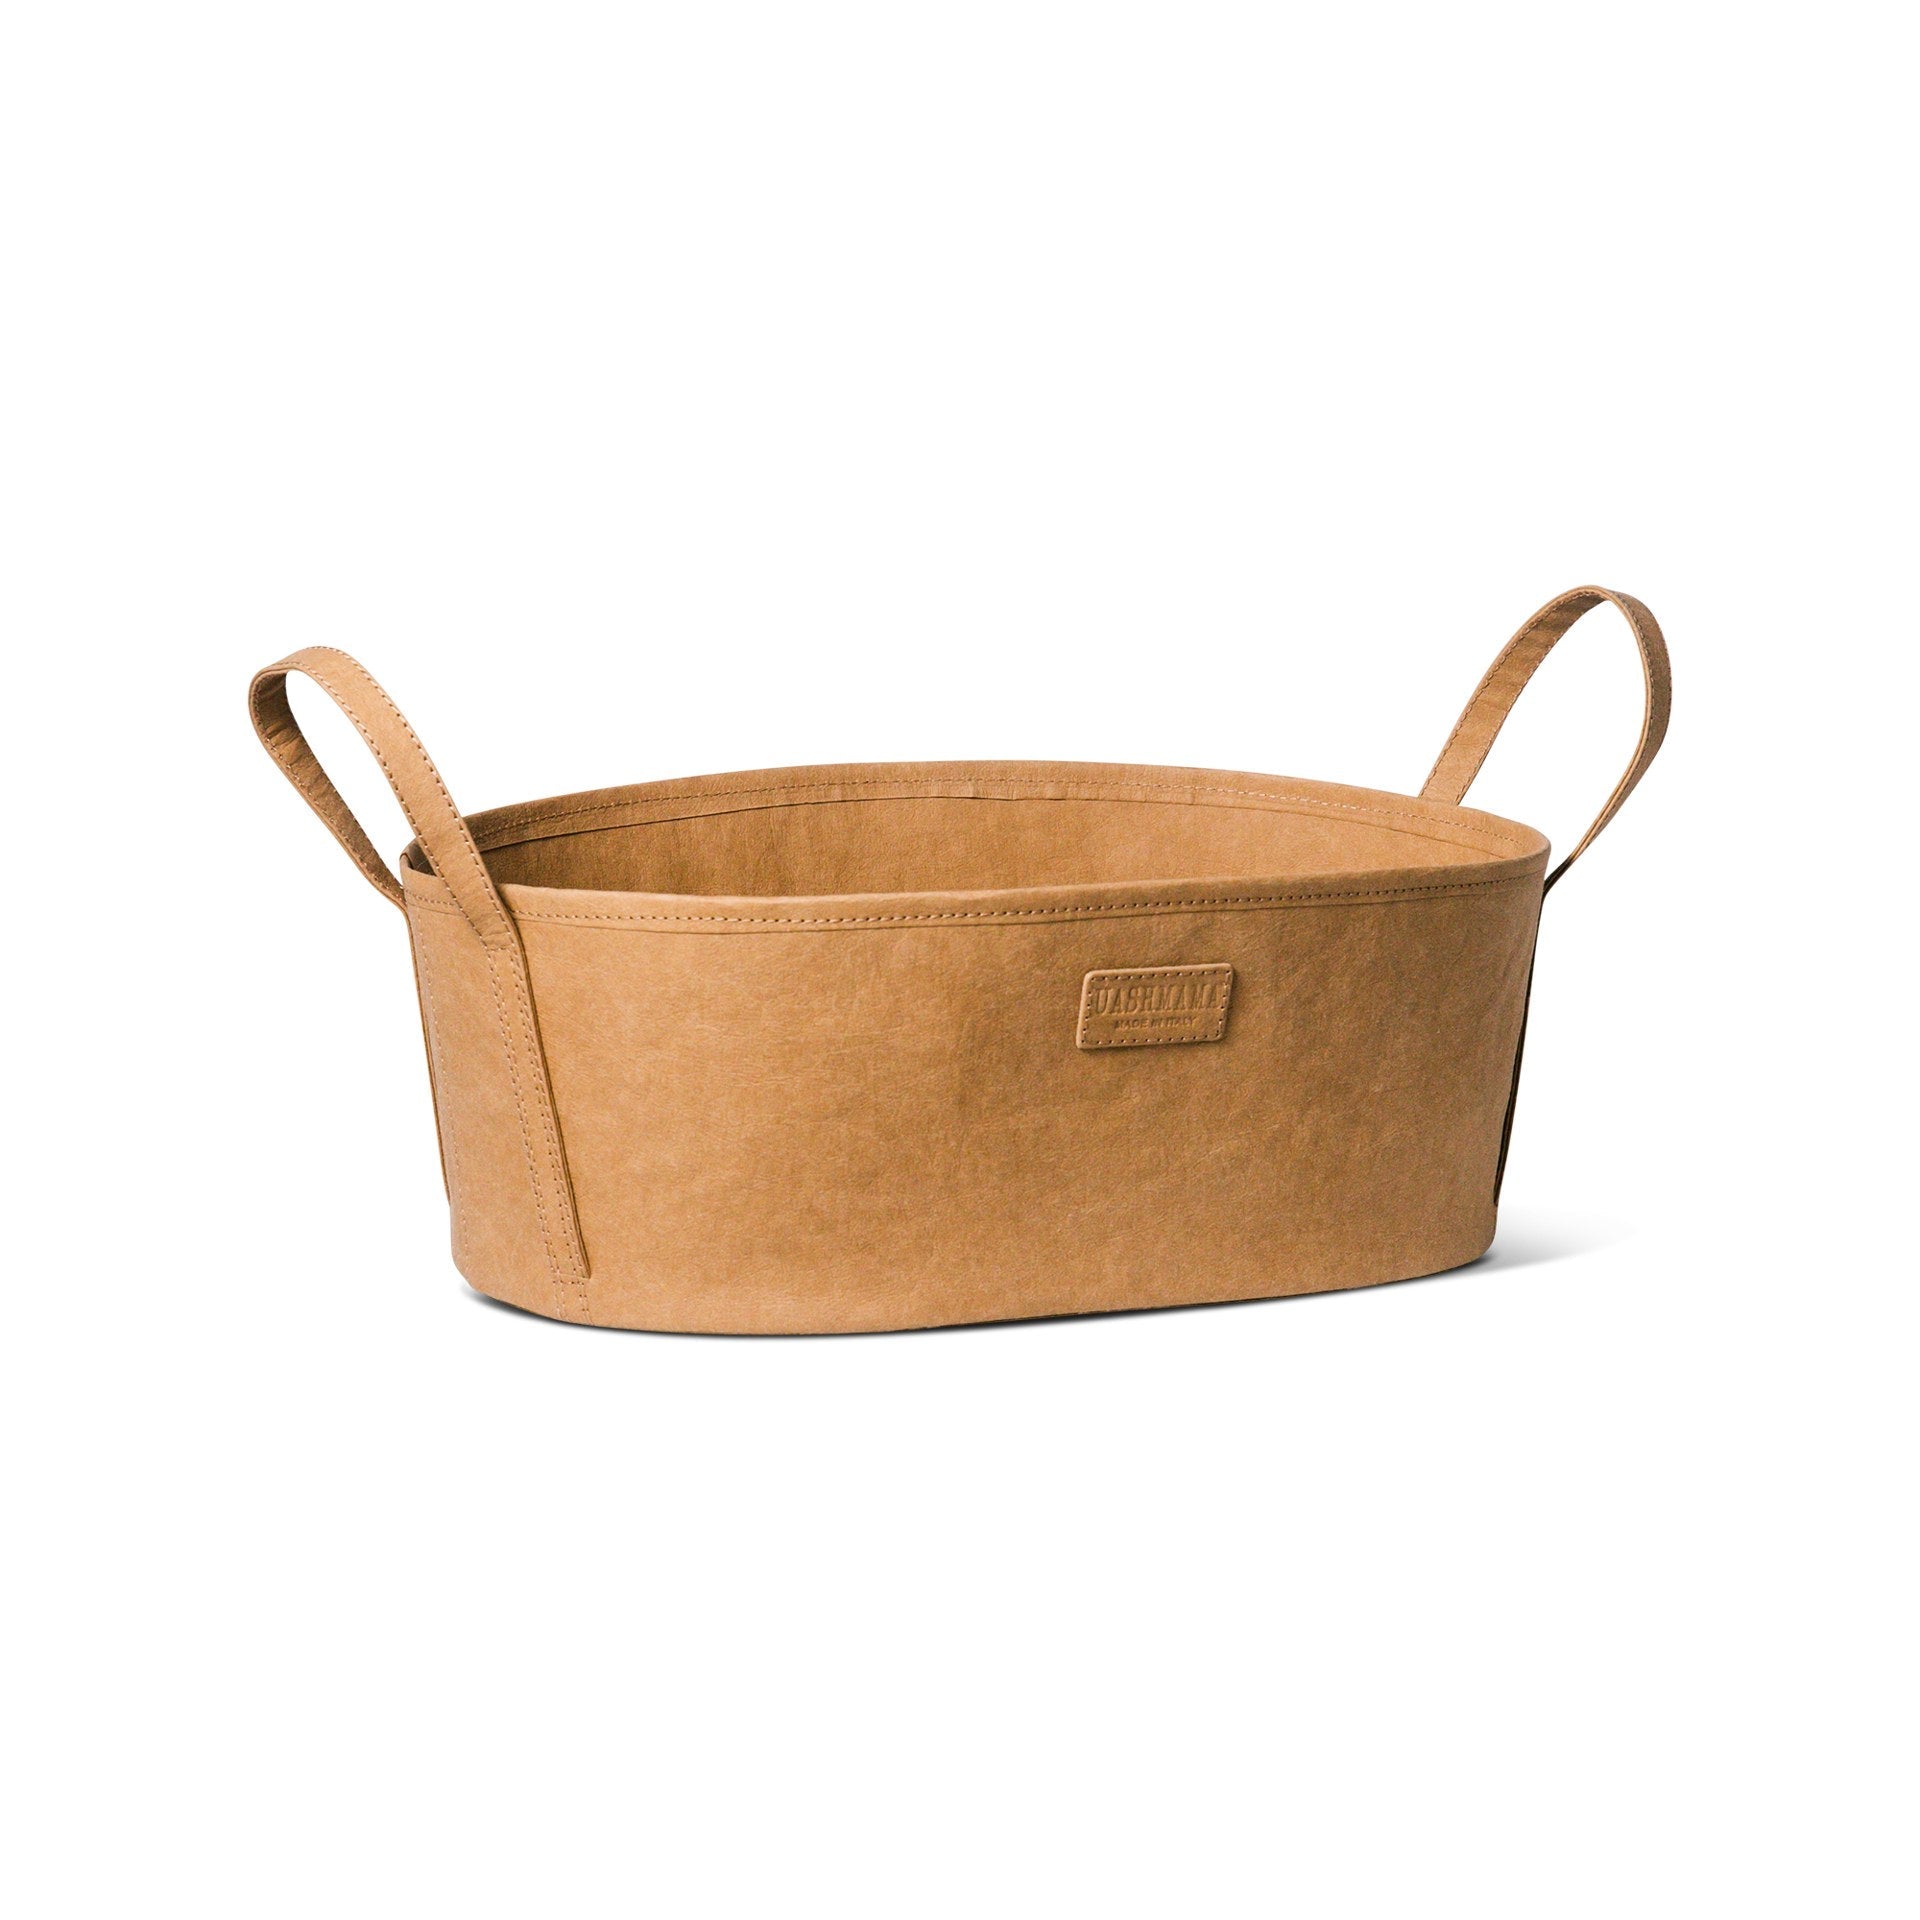 An oblong tan coloured washable paper storage box is shown from the front angle. It features an embossed all-tan UASHMAMA logo tab on the front.